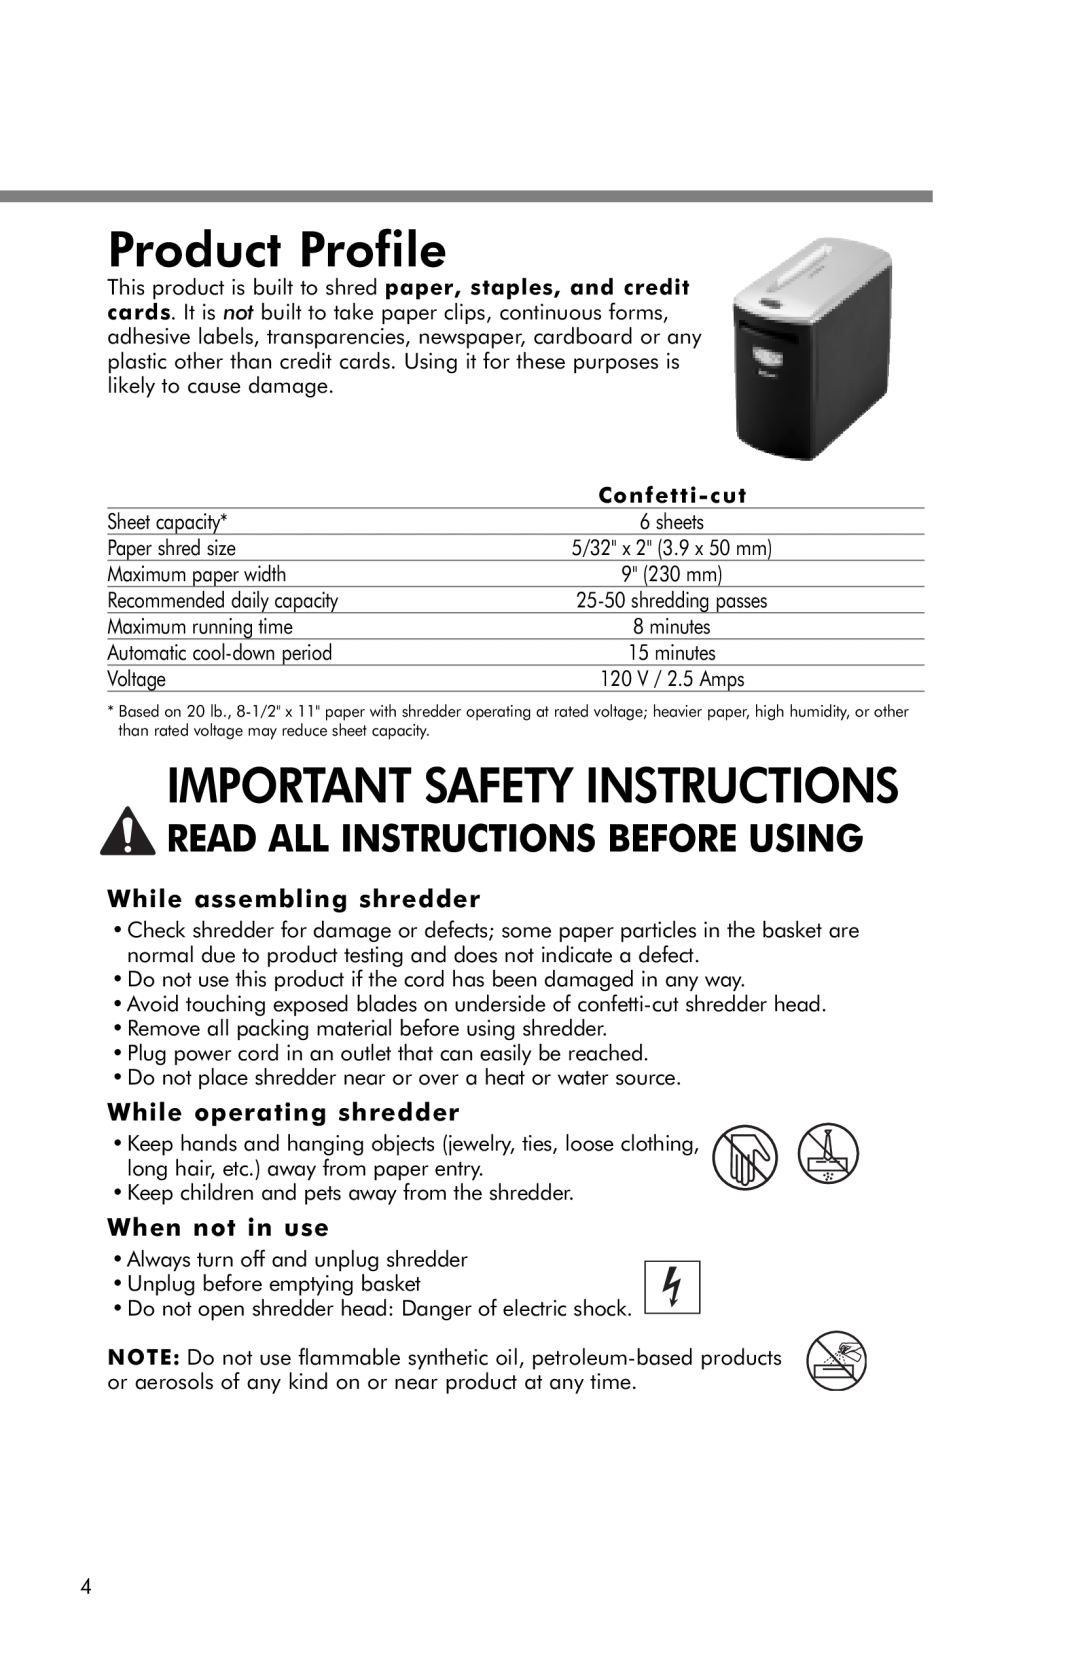 Fellowes T580C manual Product Profile, Important Safety Instructions, While assembling shredder, While operating shredder 